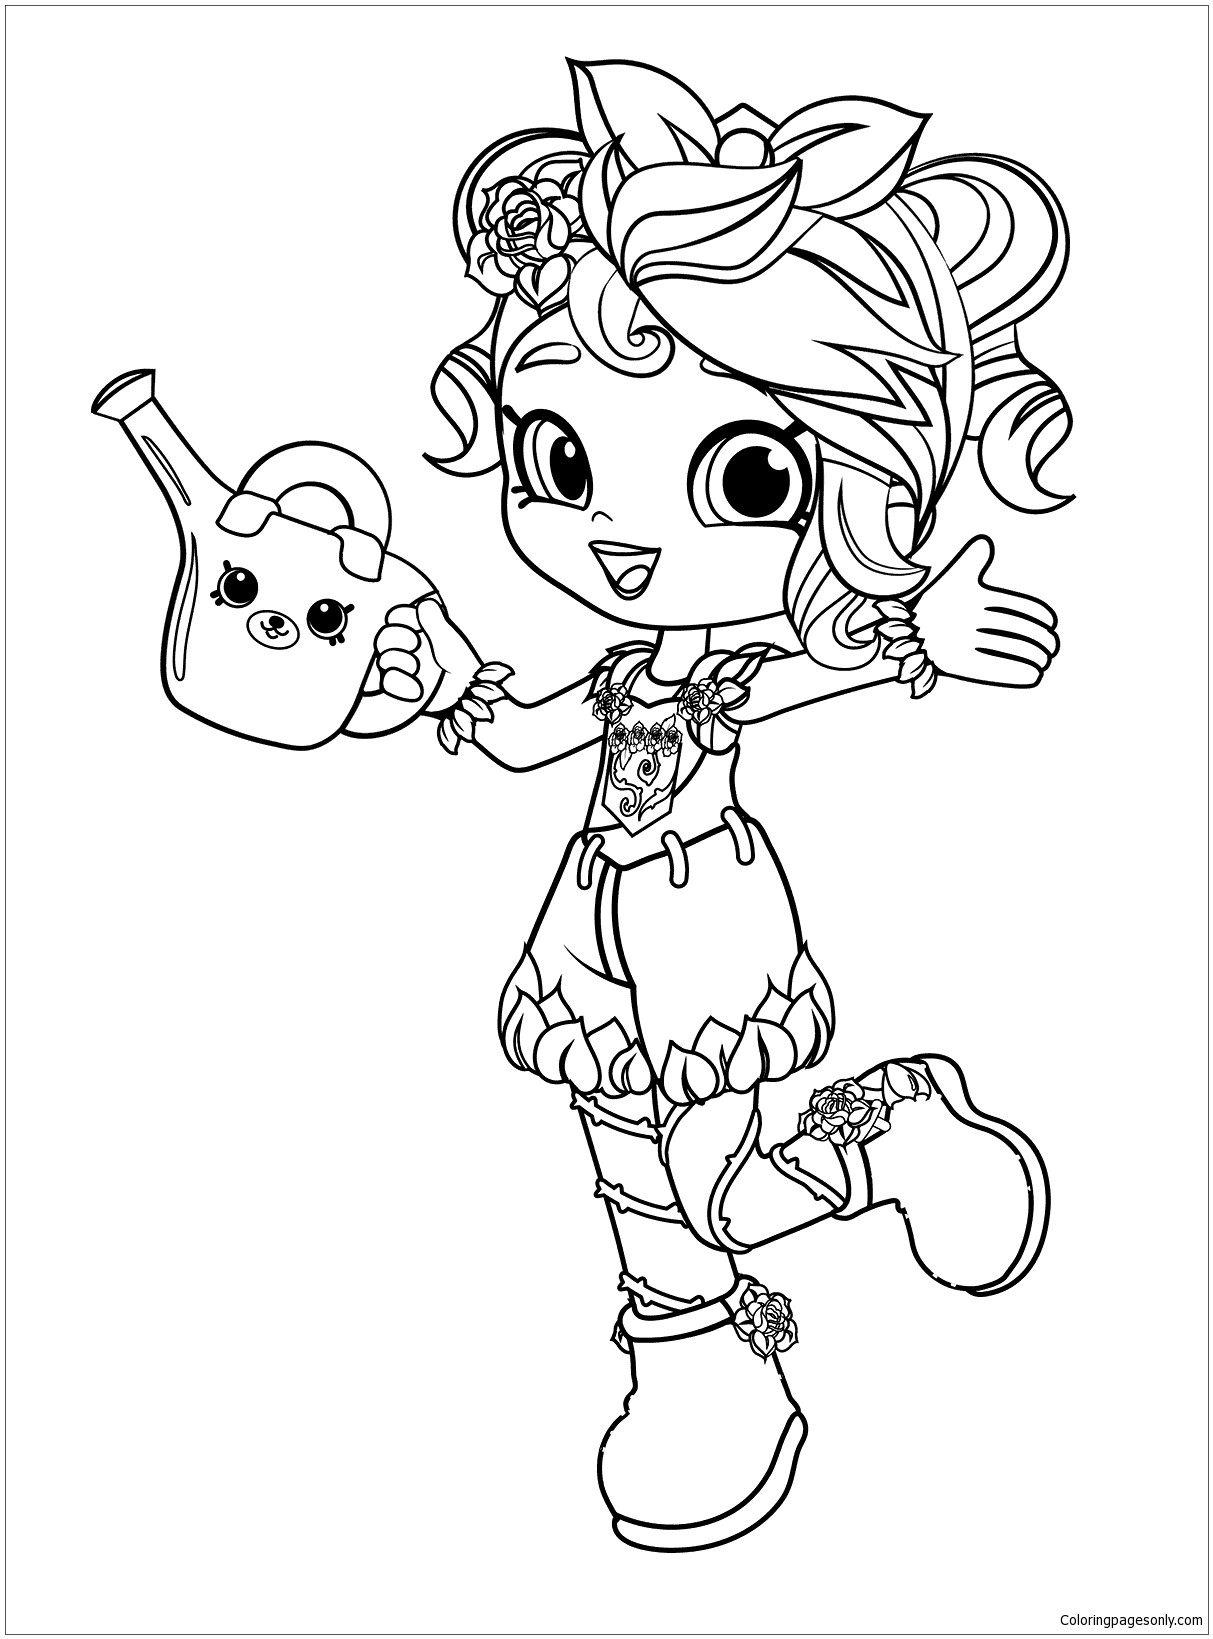 Coloring Pages For Girls Shopkins Apple
 Shopkins Shoppies Ballet Coloring Page Free Coloring